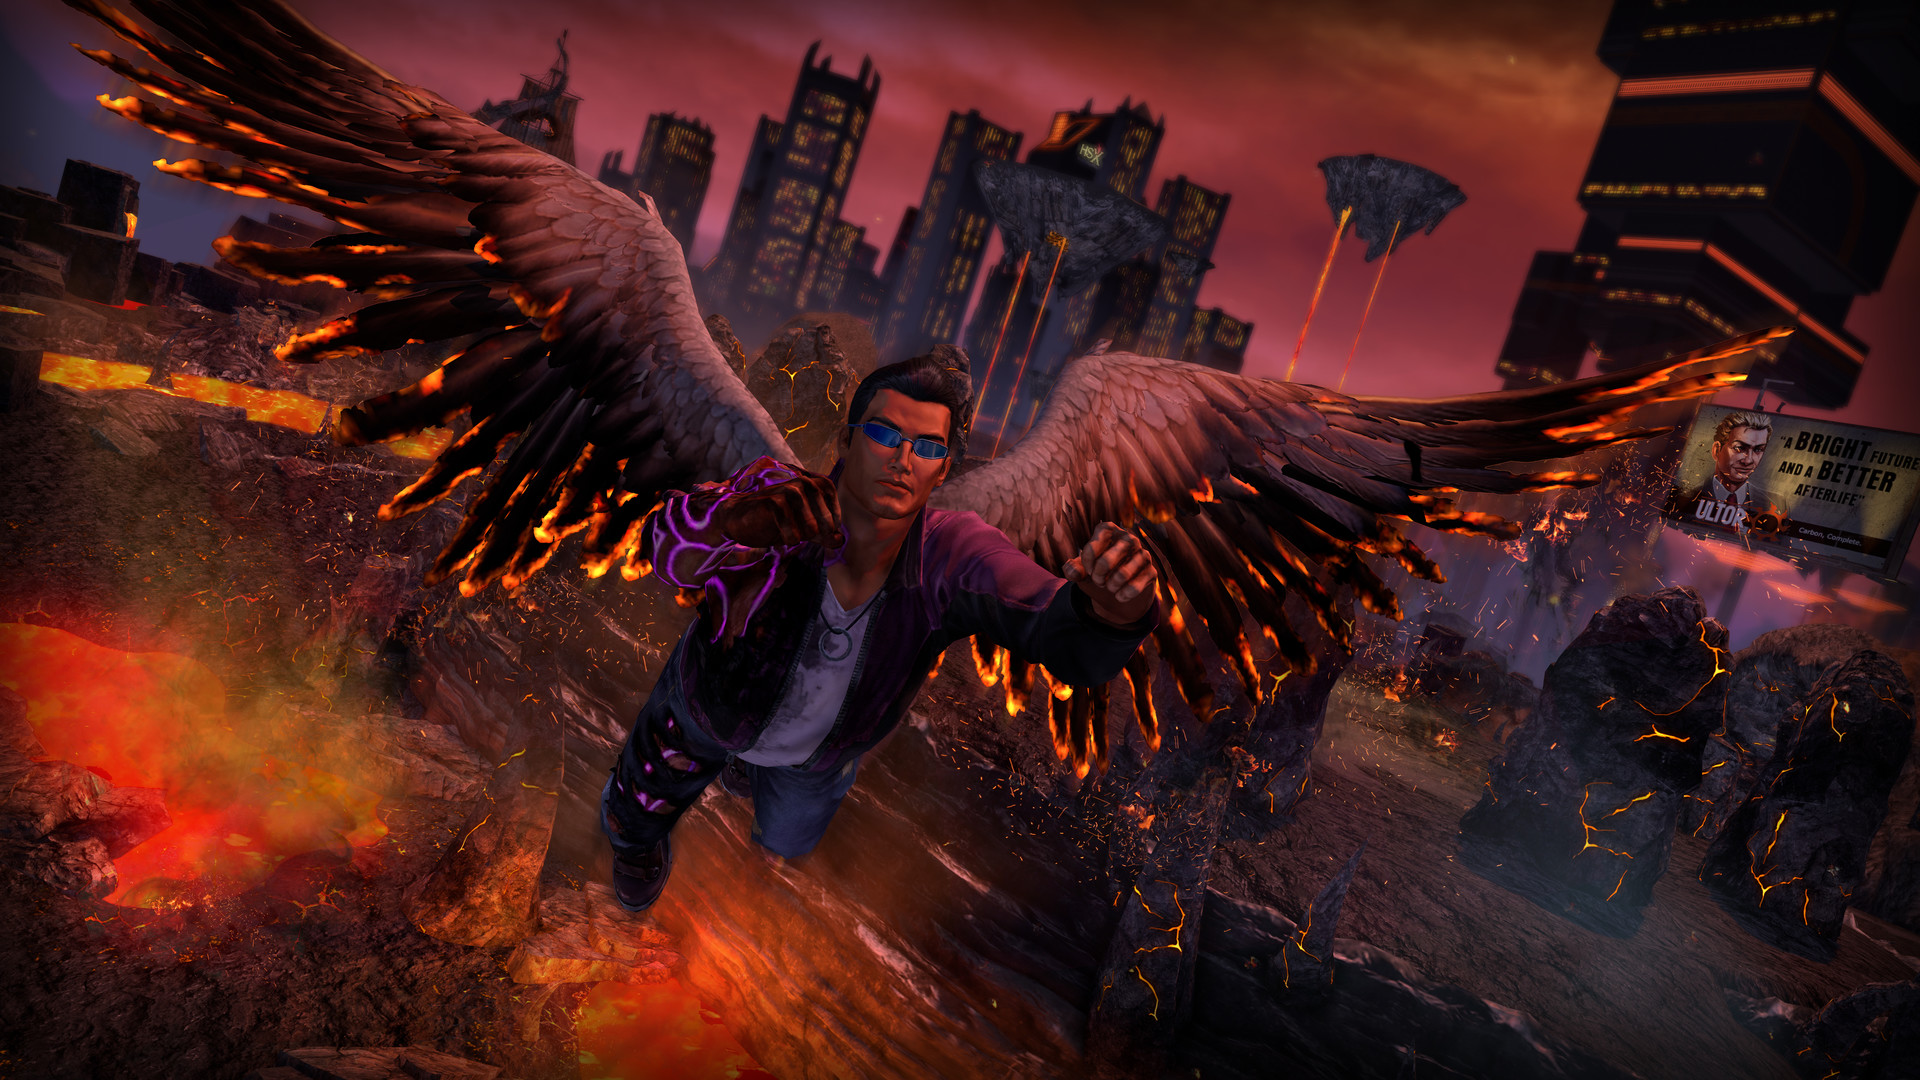 Save 50% on Saints Row: Gat out of Hell - Devil's Workshop pack on Steam